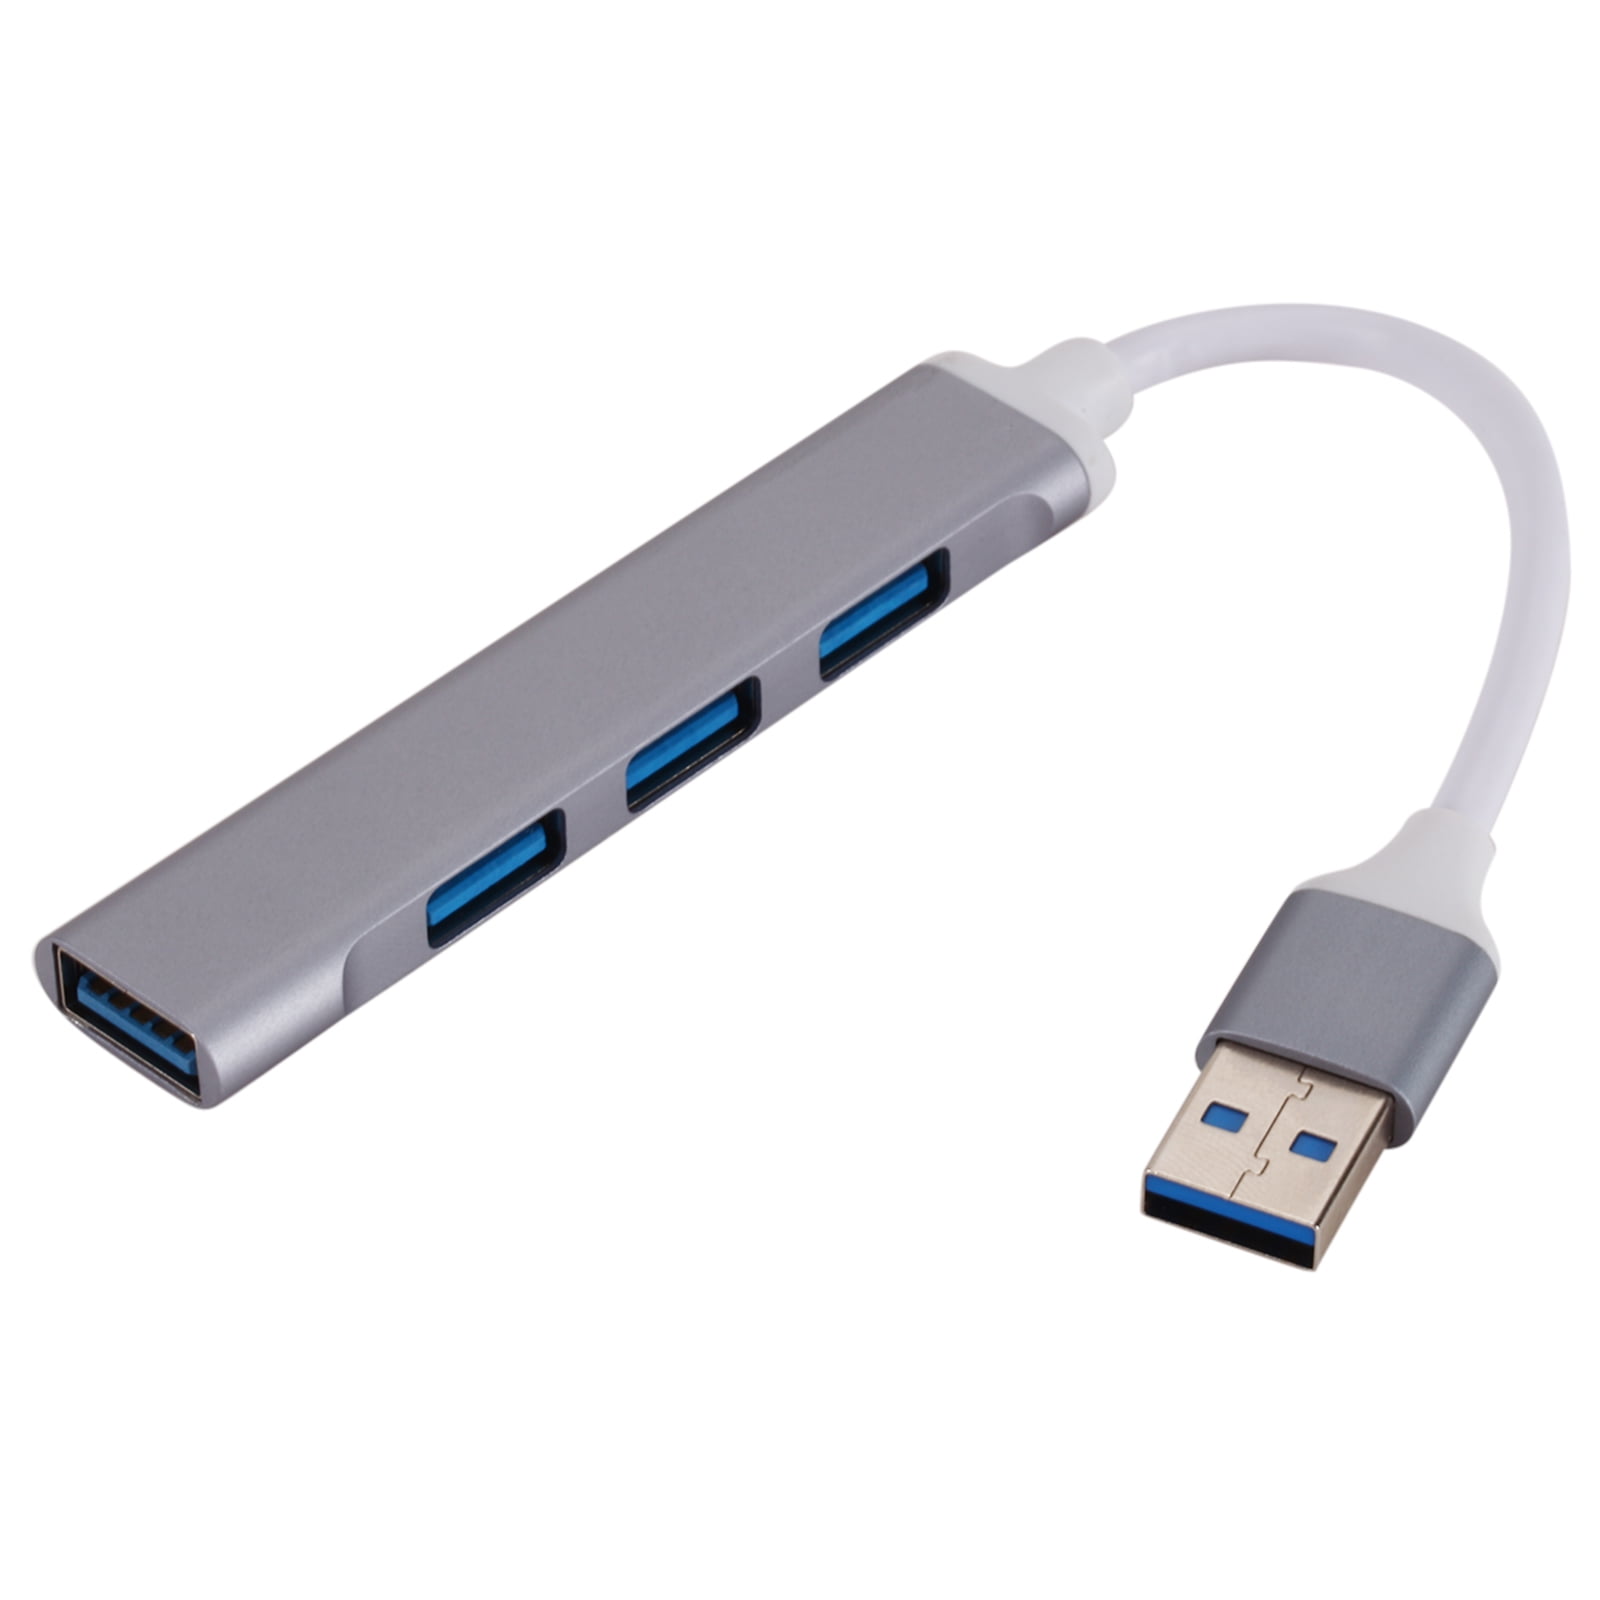 Mini USB 2.0 4 Port Cable Hub Spliter Adapter For Computer Notebook PC Laptop RS 